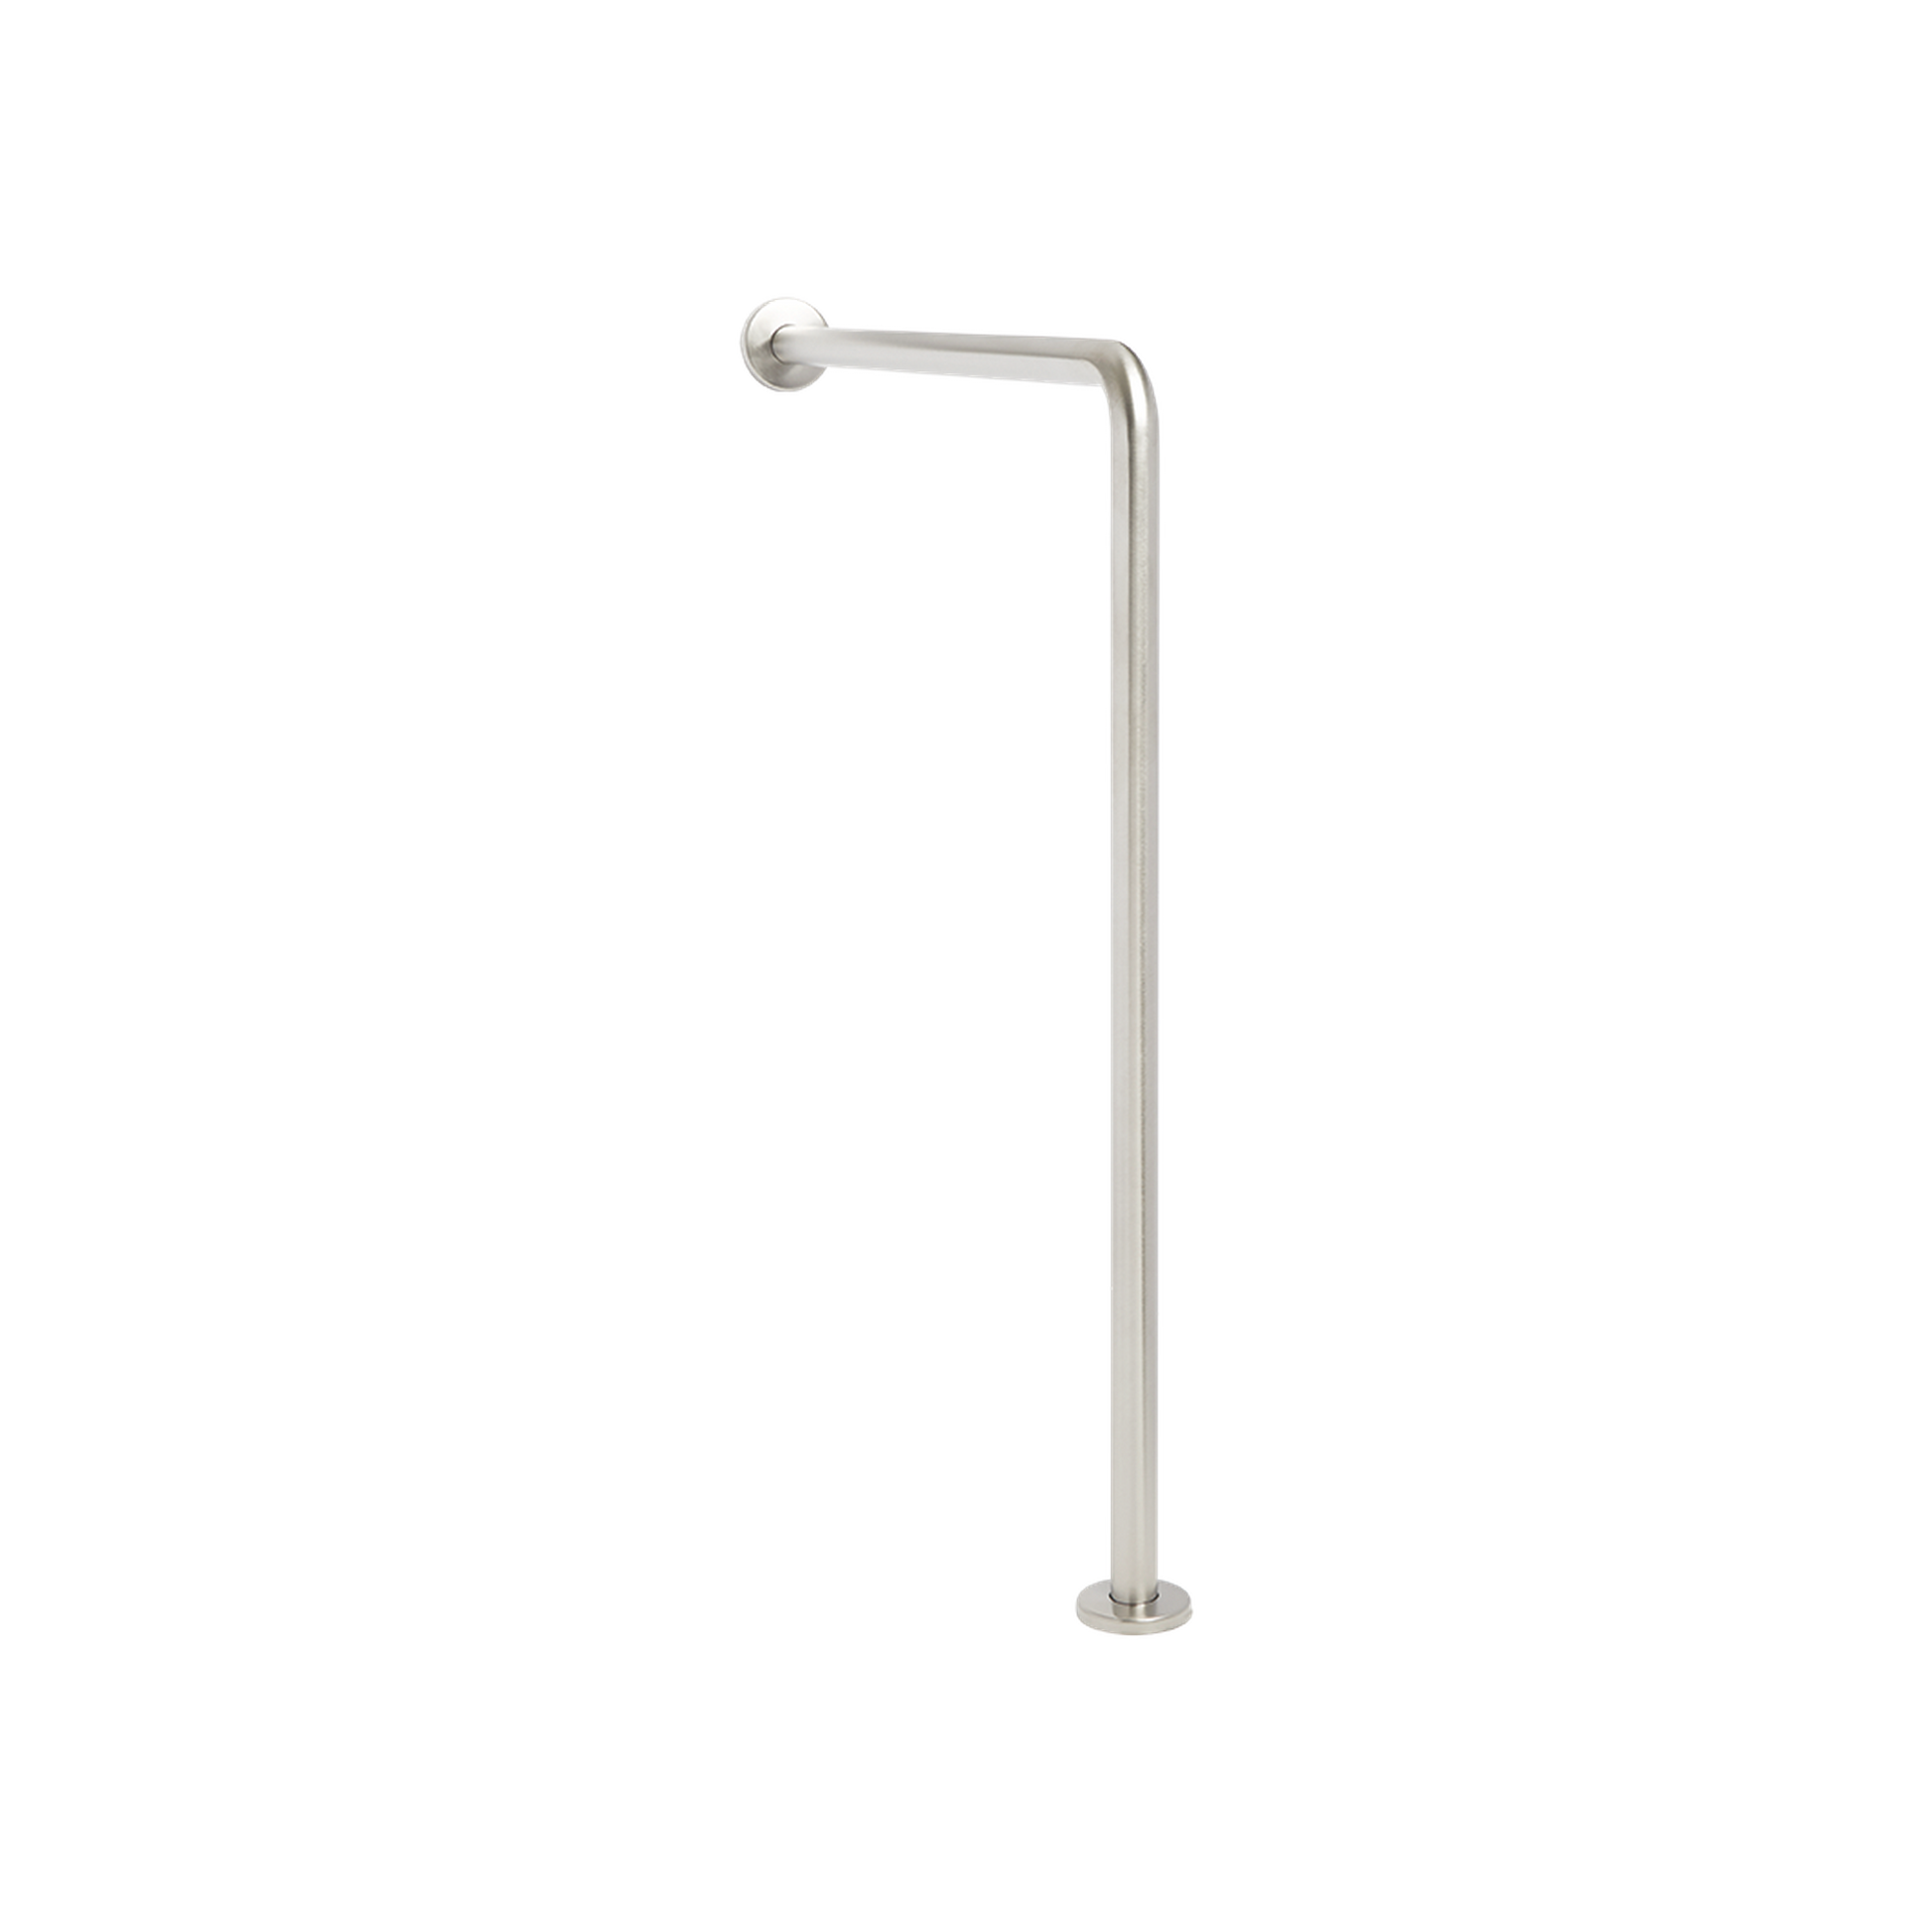 Seachrome Signature Series 33" H x 30" D Satin Stainless Steel 1.25" Bar Diameter Exposed Flange Wall-To-Floor Grab Bar